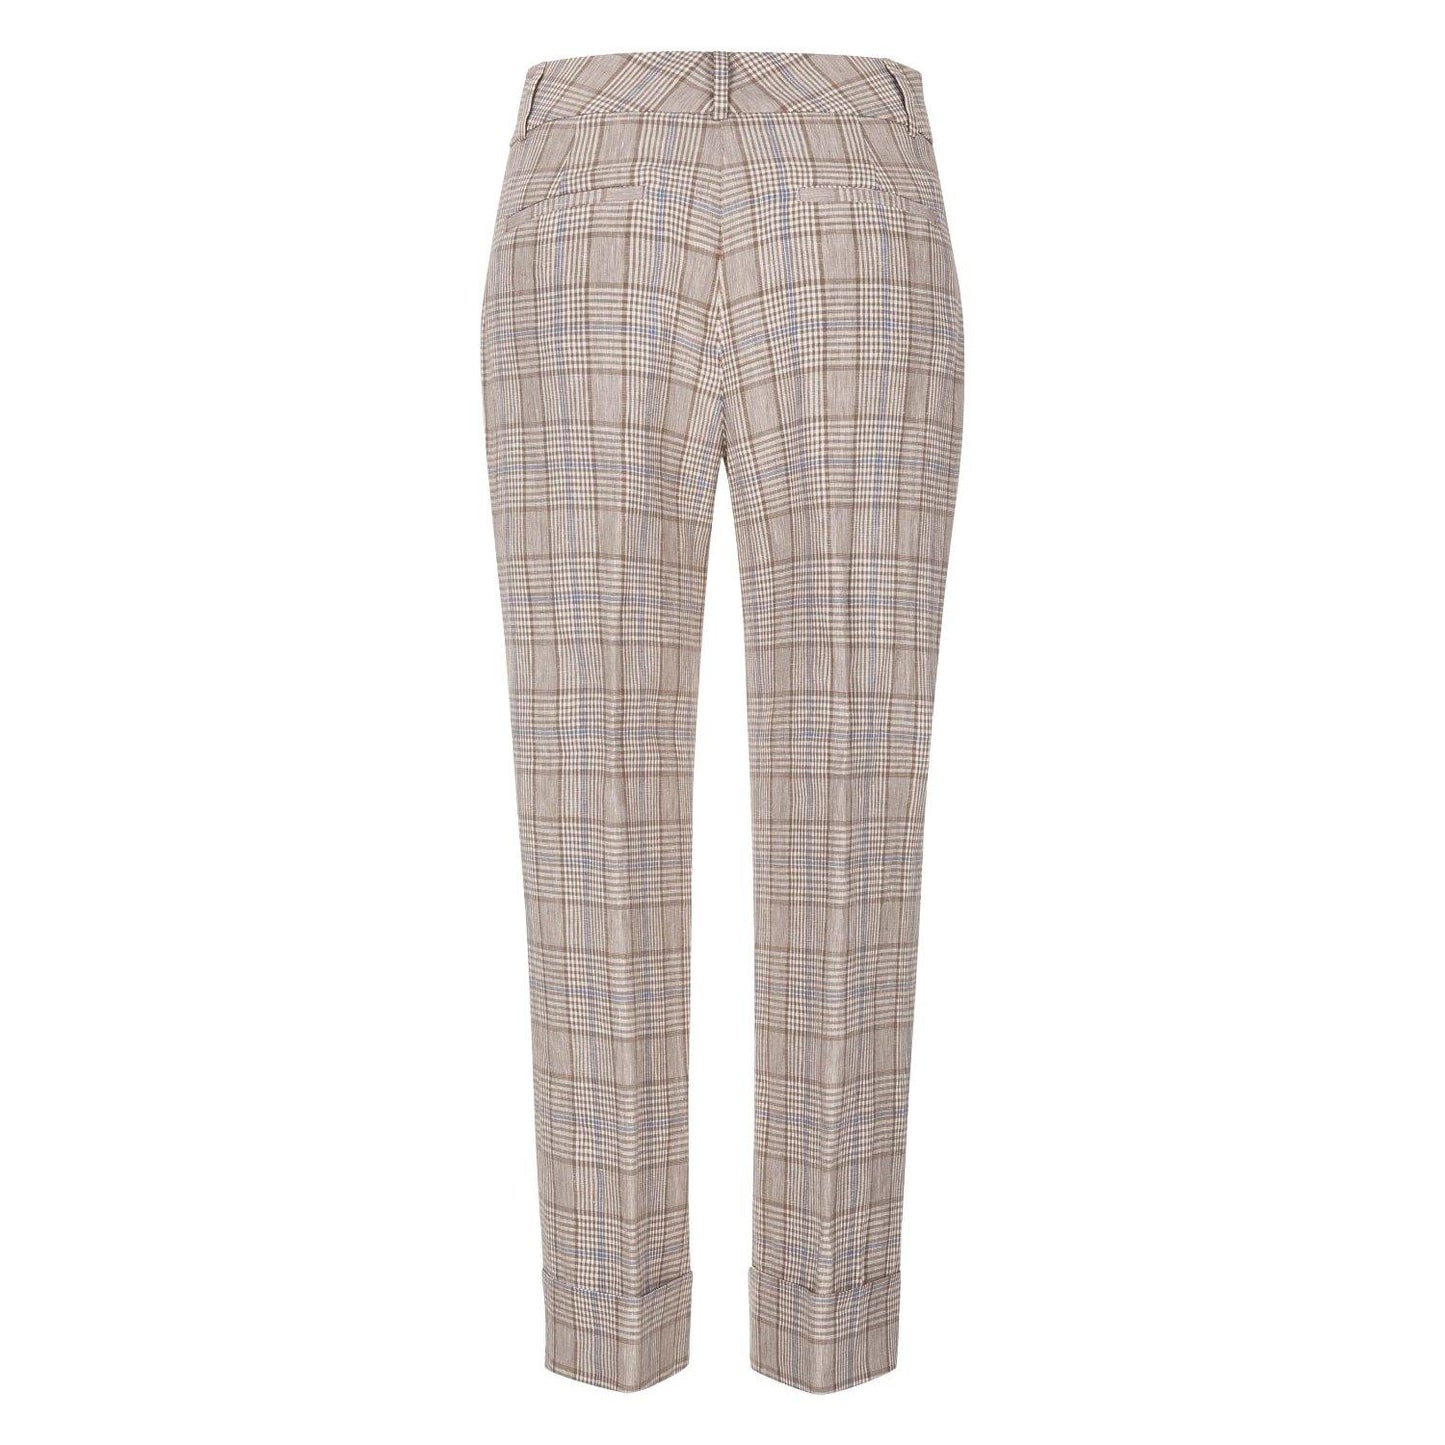 Peserico Glencheck trousers in pure linen